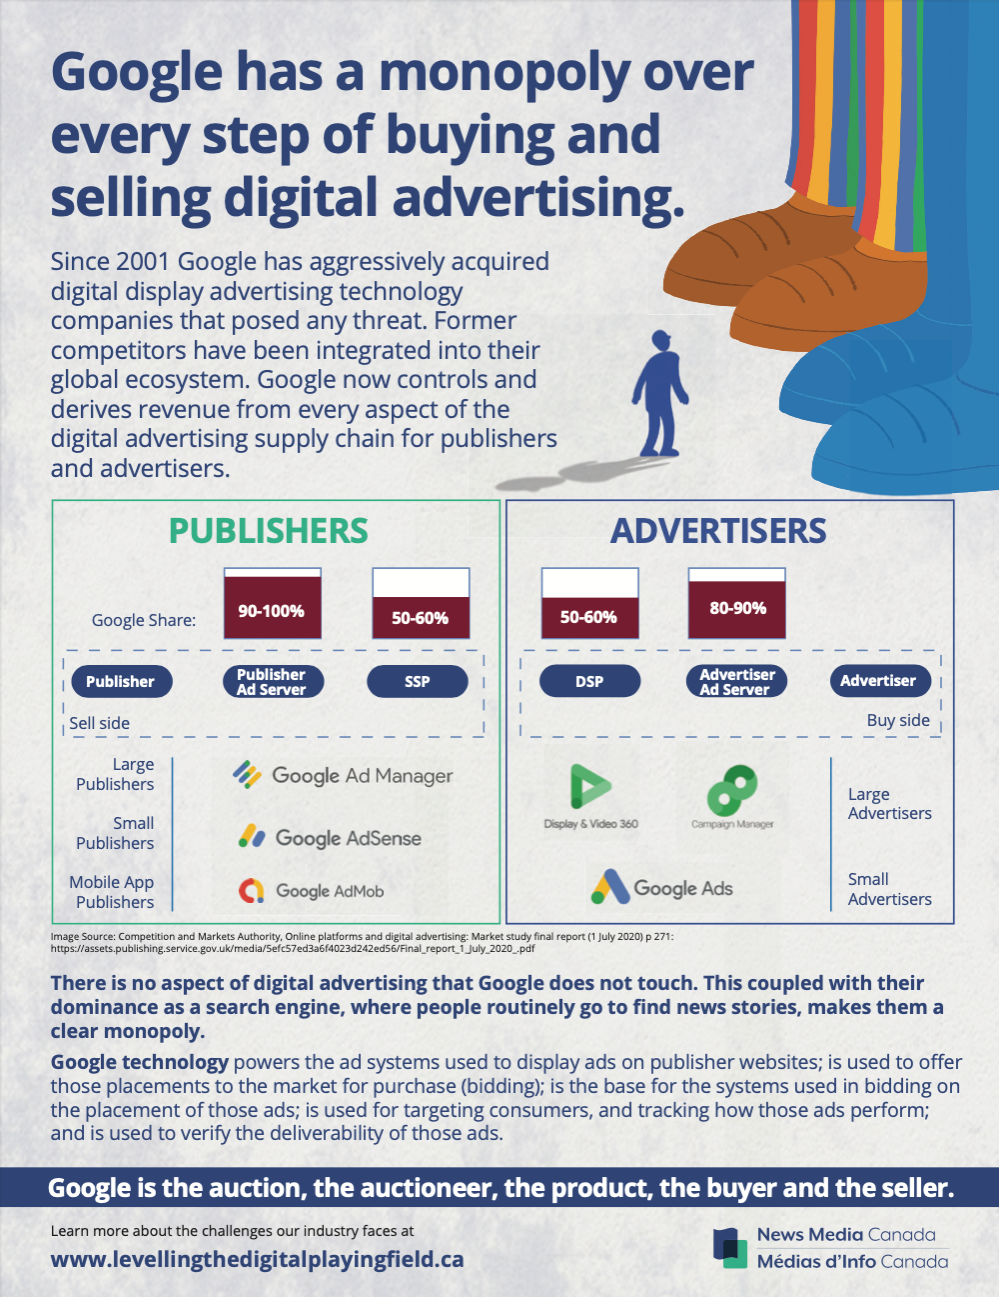 Levelling the Digital Playing Field - Fact Sheet